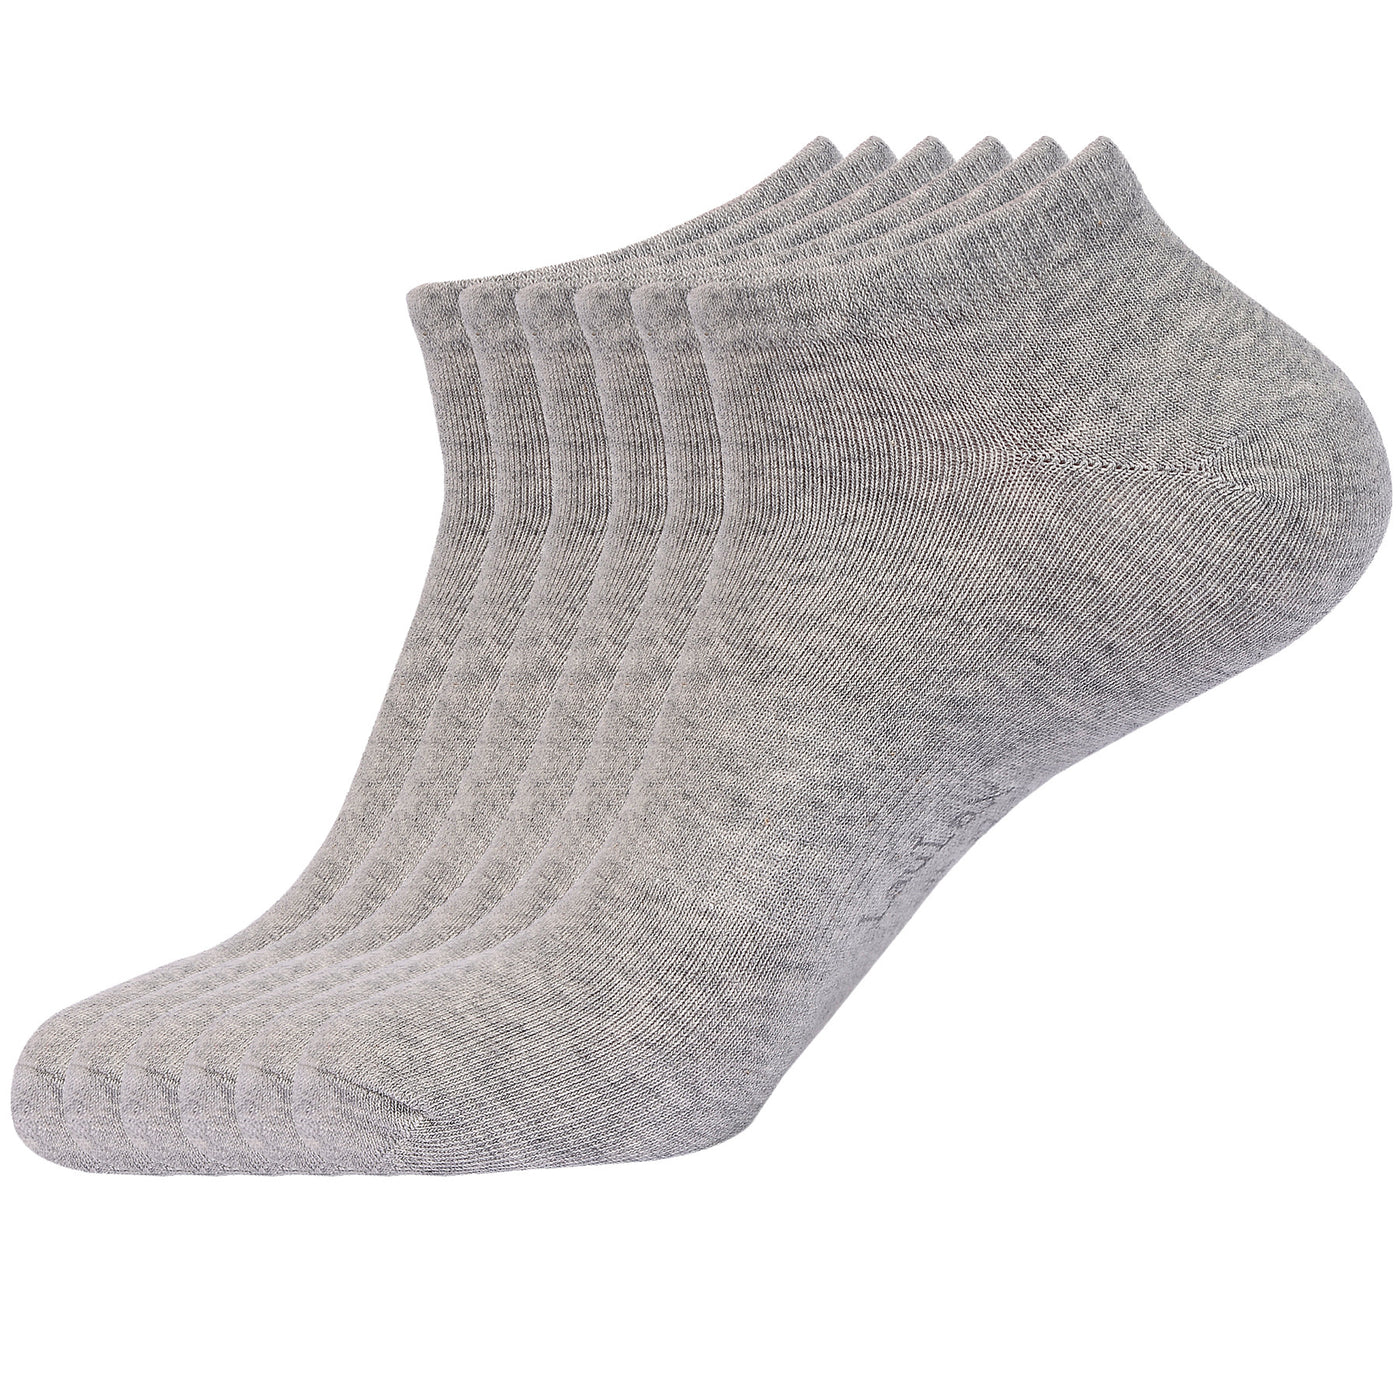 Laulax 6 Pairs Finest Combed Cotton Arch Support Trainer Socks, Grey, Size UK 12 - 14 / Europ 47 - 49